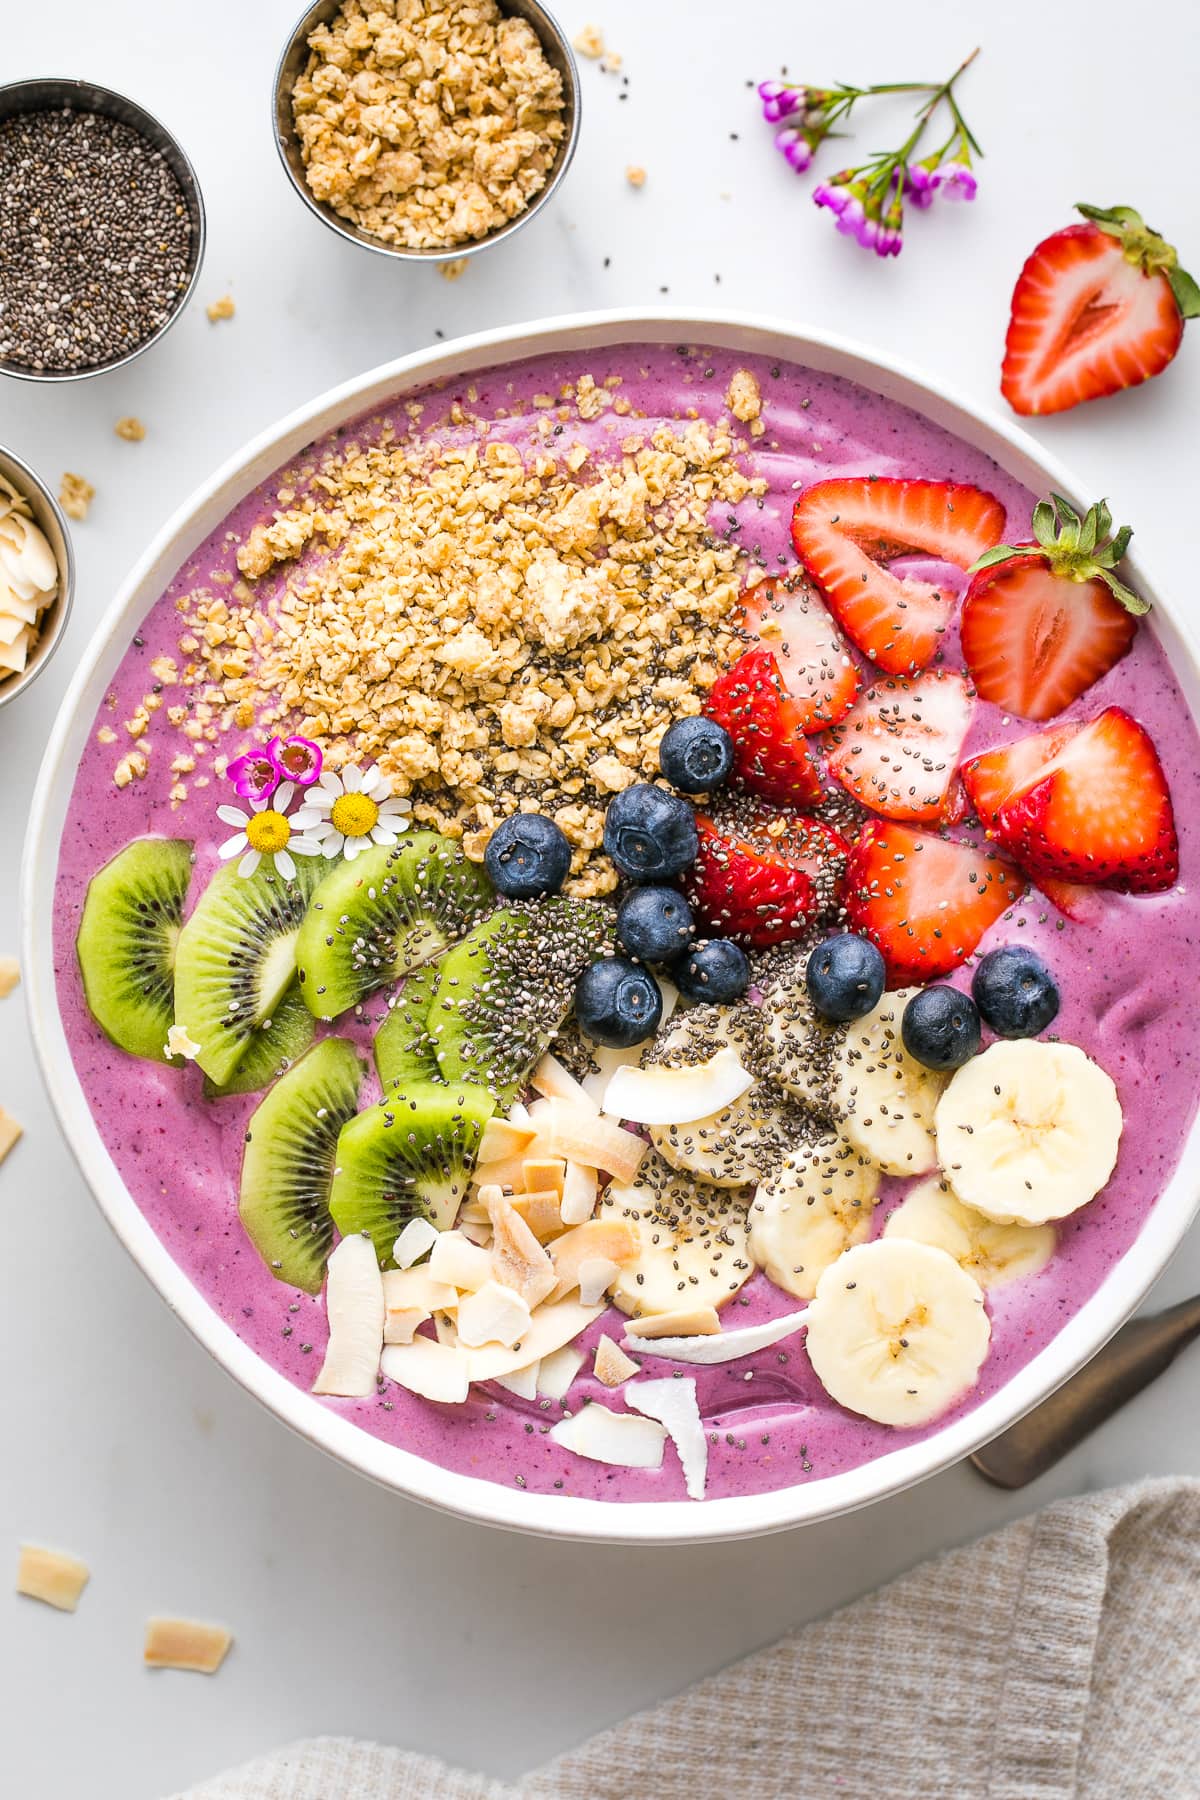 Enlighten Smoothie Bowl The Ultimate Smoothie in a Bowl   The ...